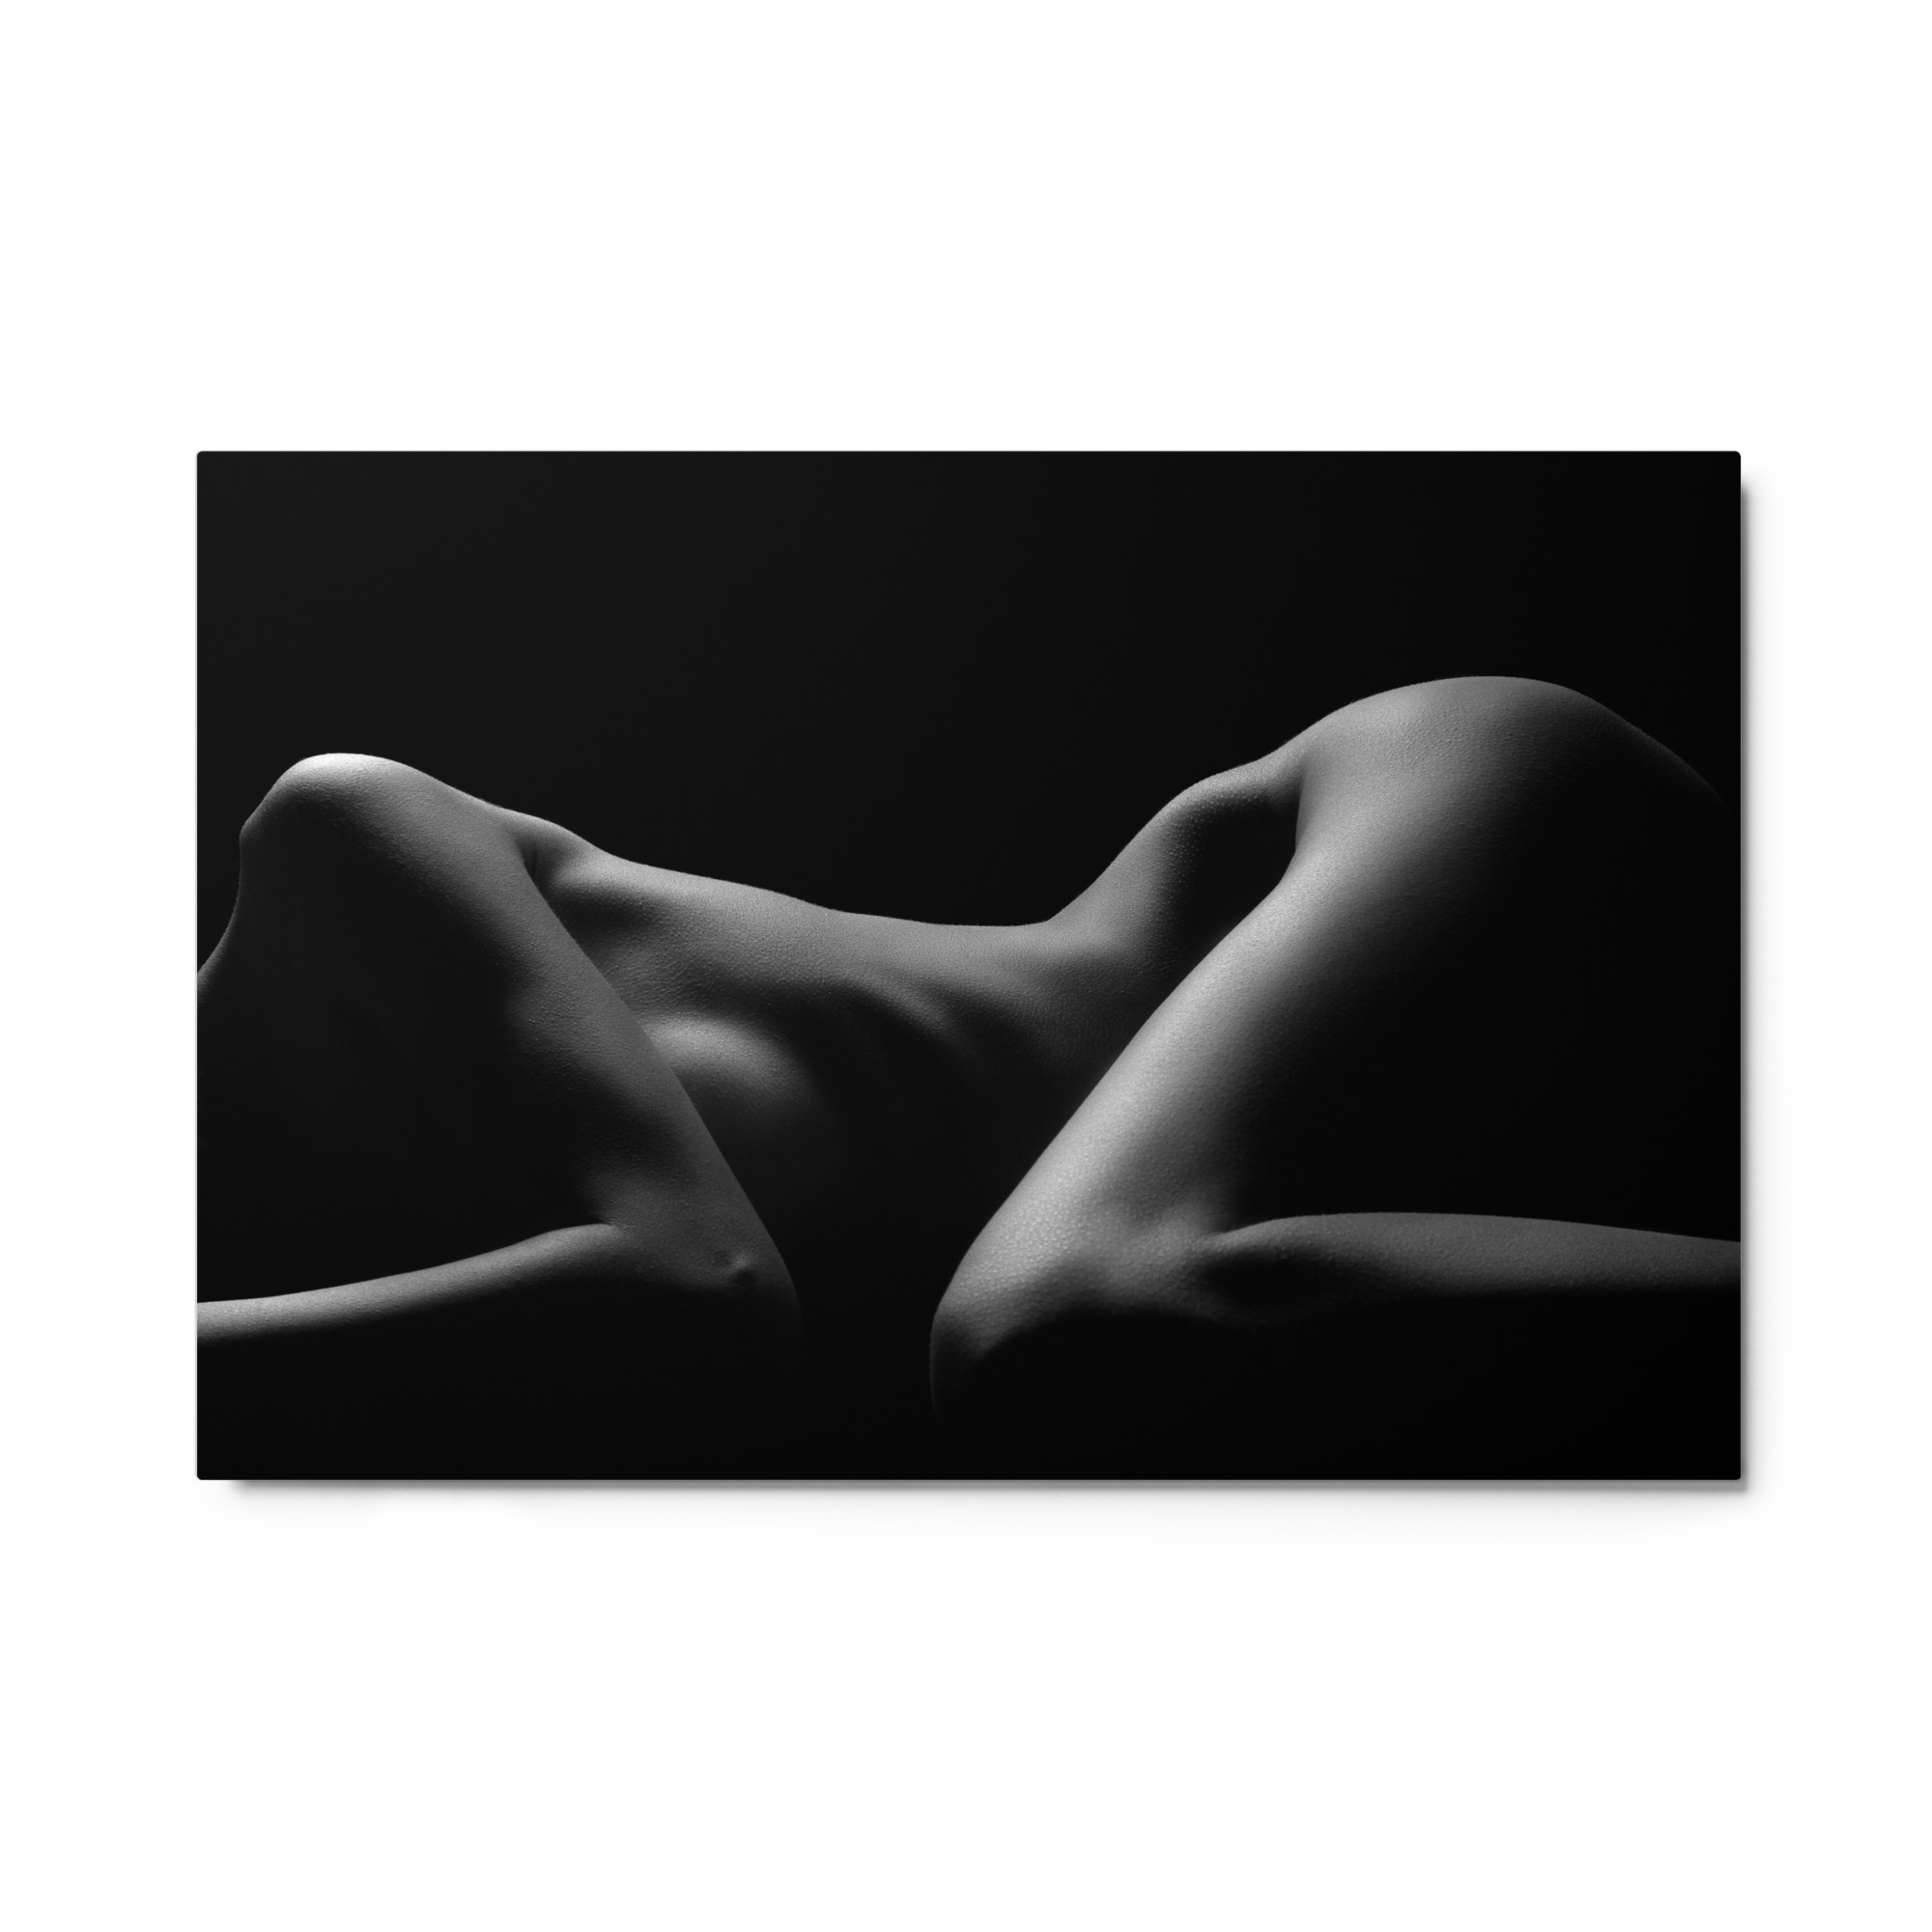 black and white photograph of a nude female form